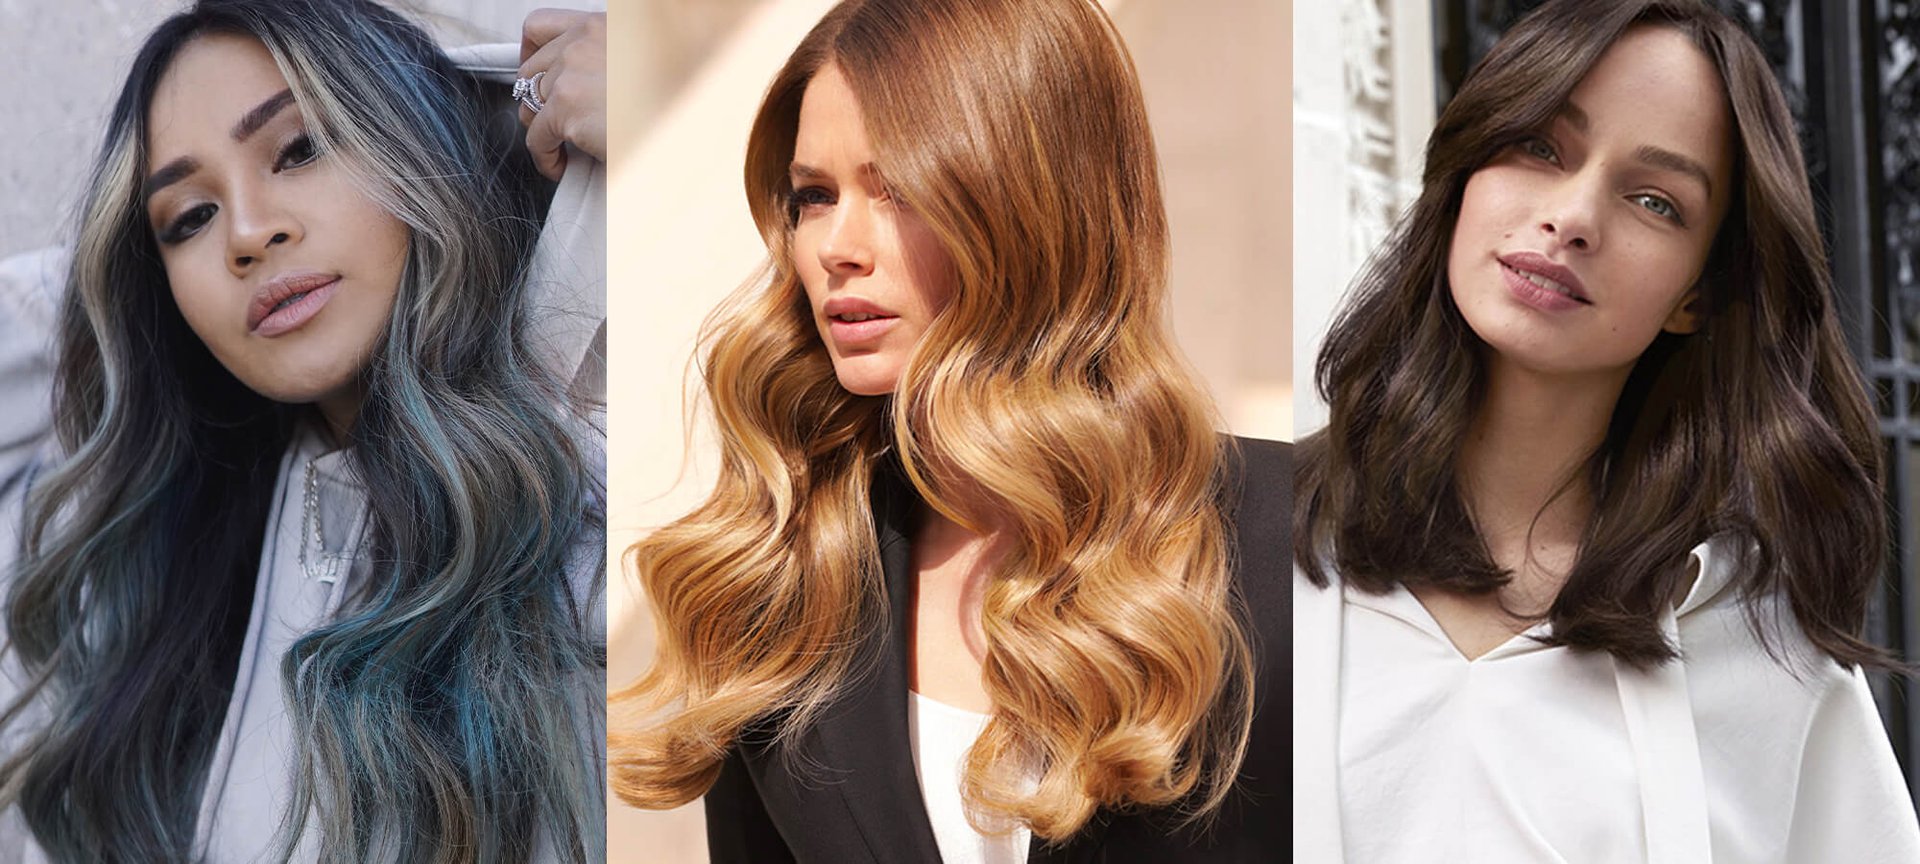 How To Get The Top Hair Colour Trends For Summer 2020 At Home | L'Oréal  Paris